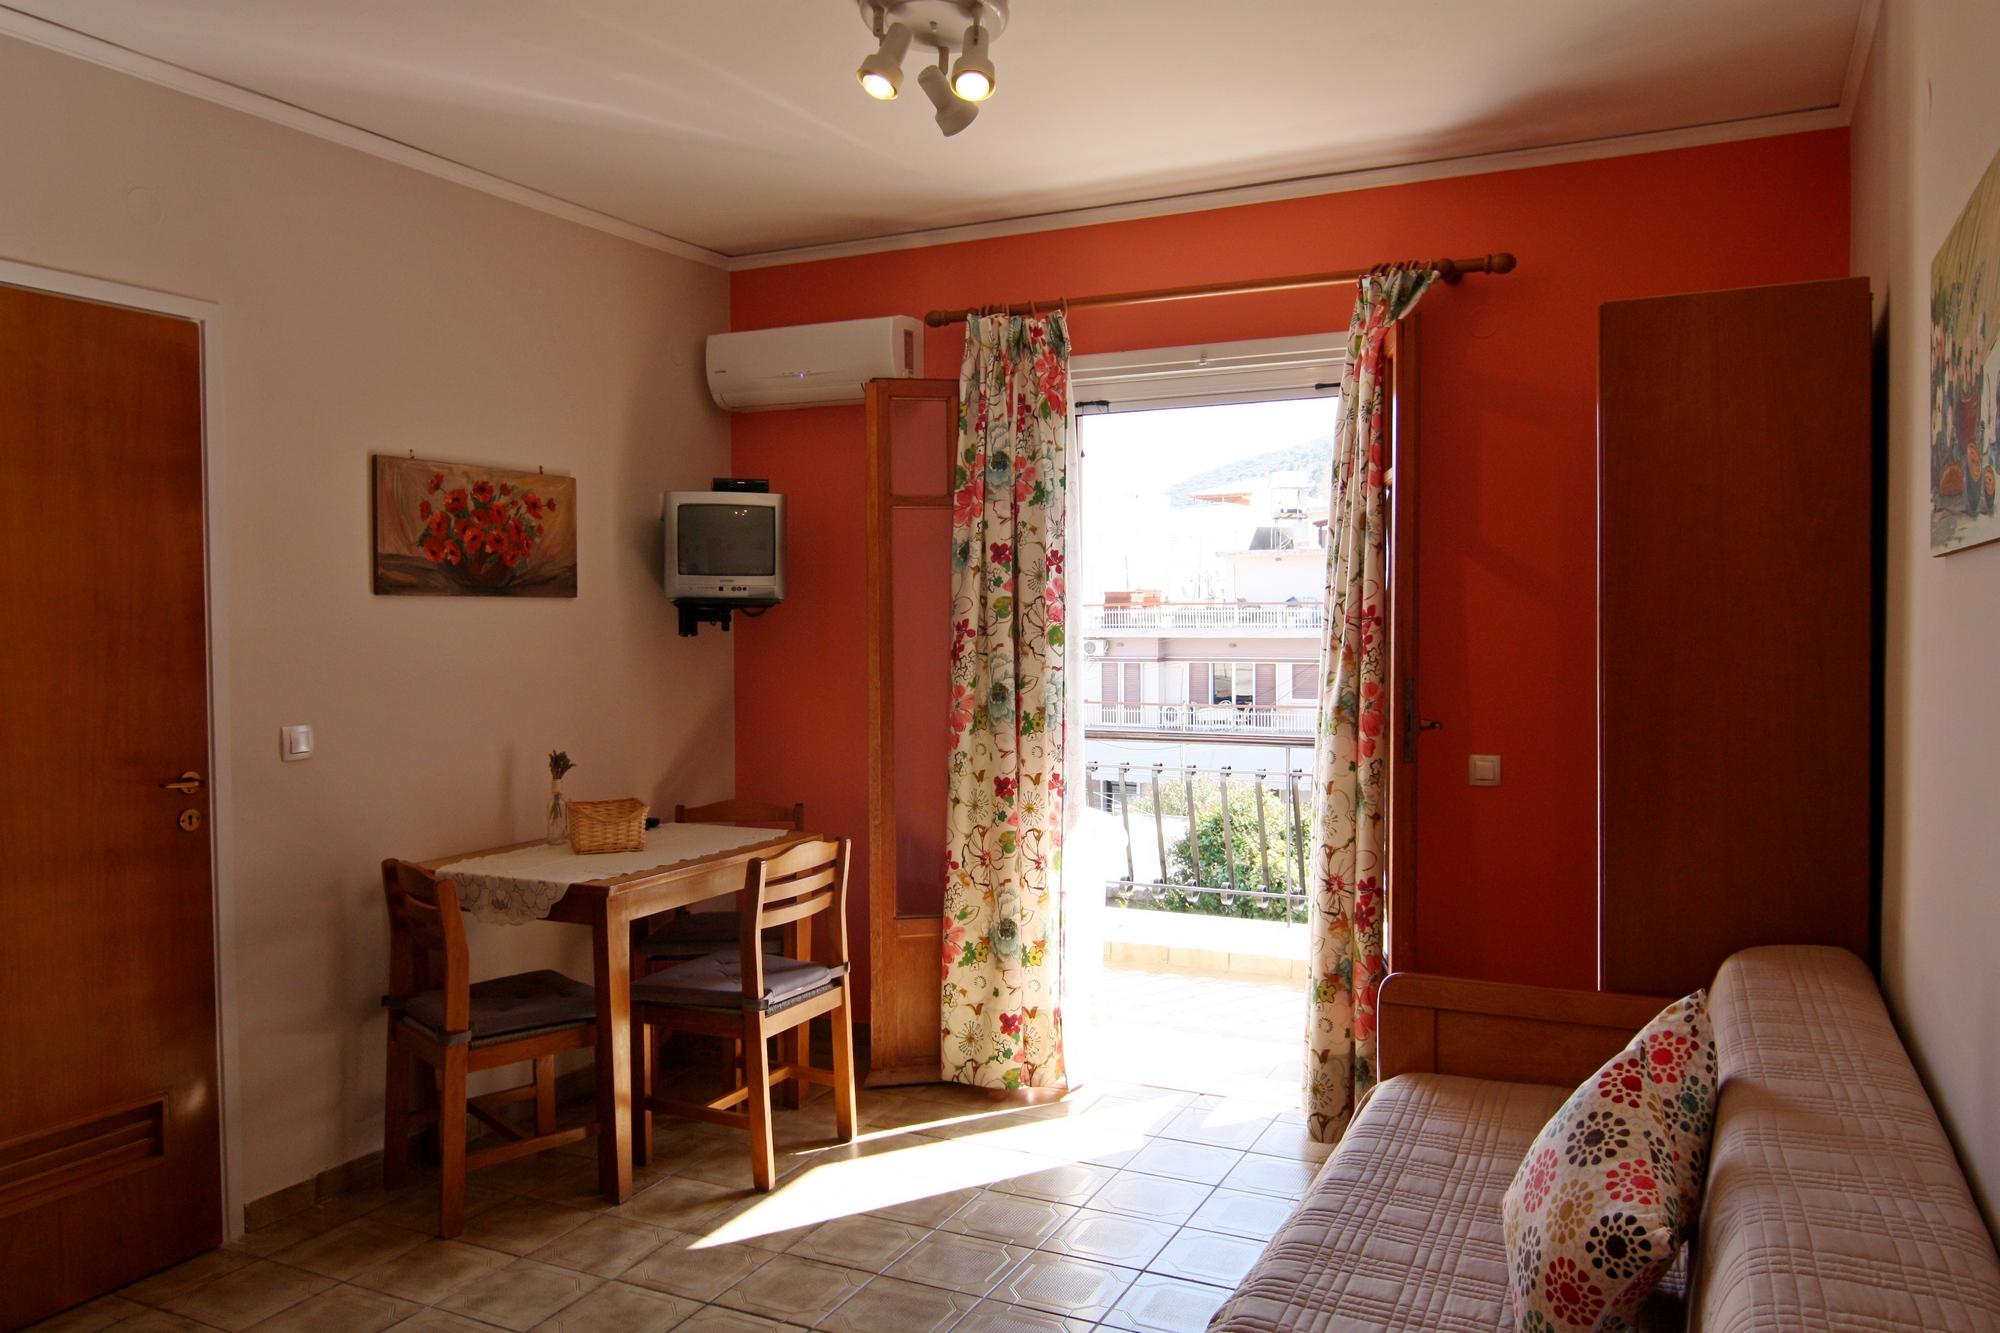 Family apartments for summer holidays in tolo